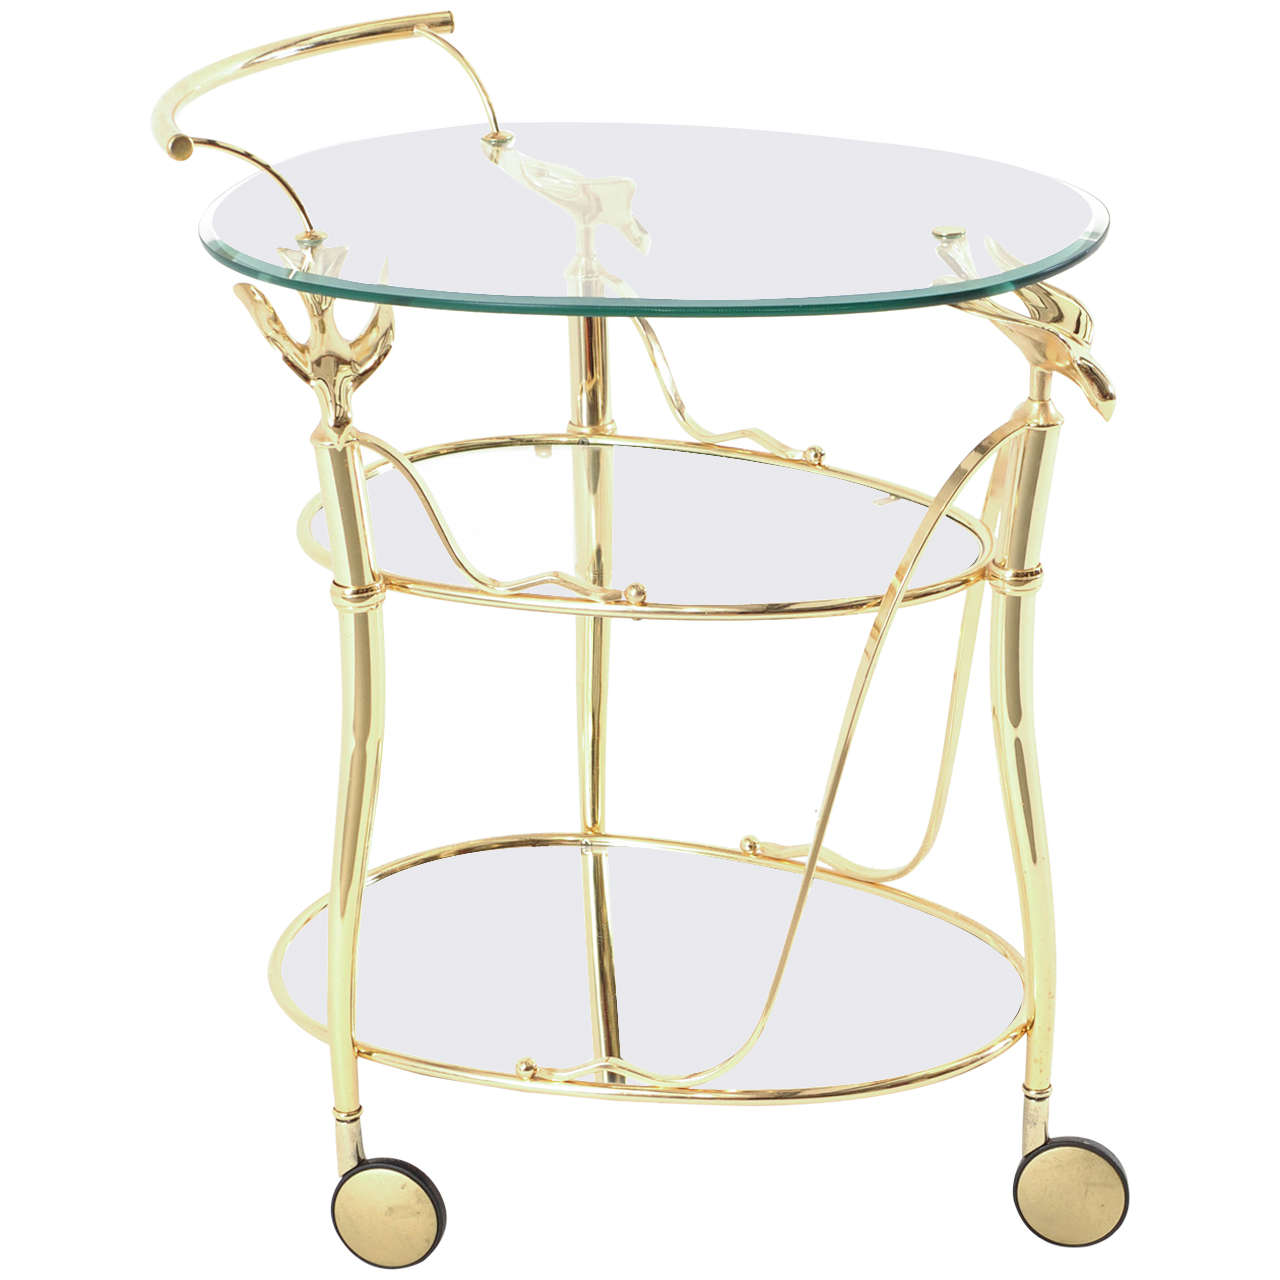 Gilded Bar Cart or Serving Trolley with Three Levels on Wheels